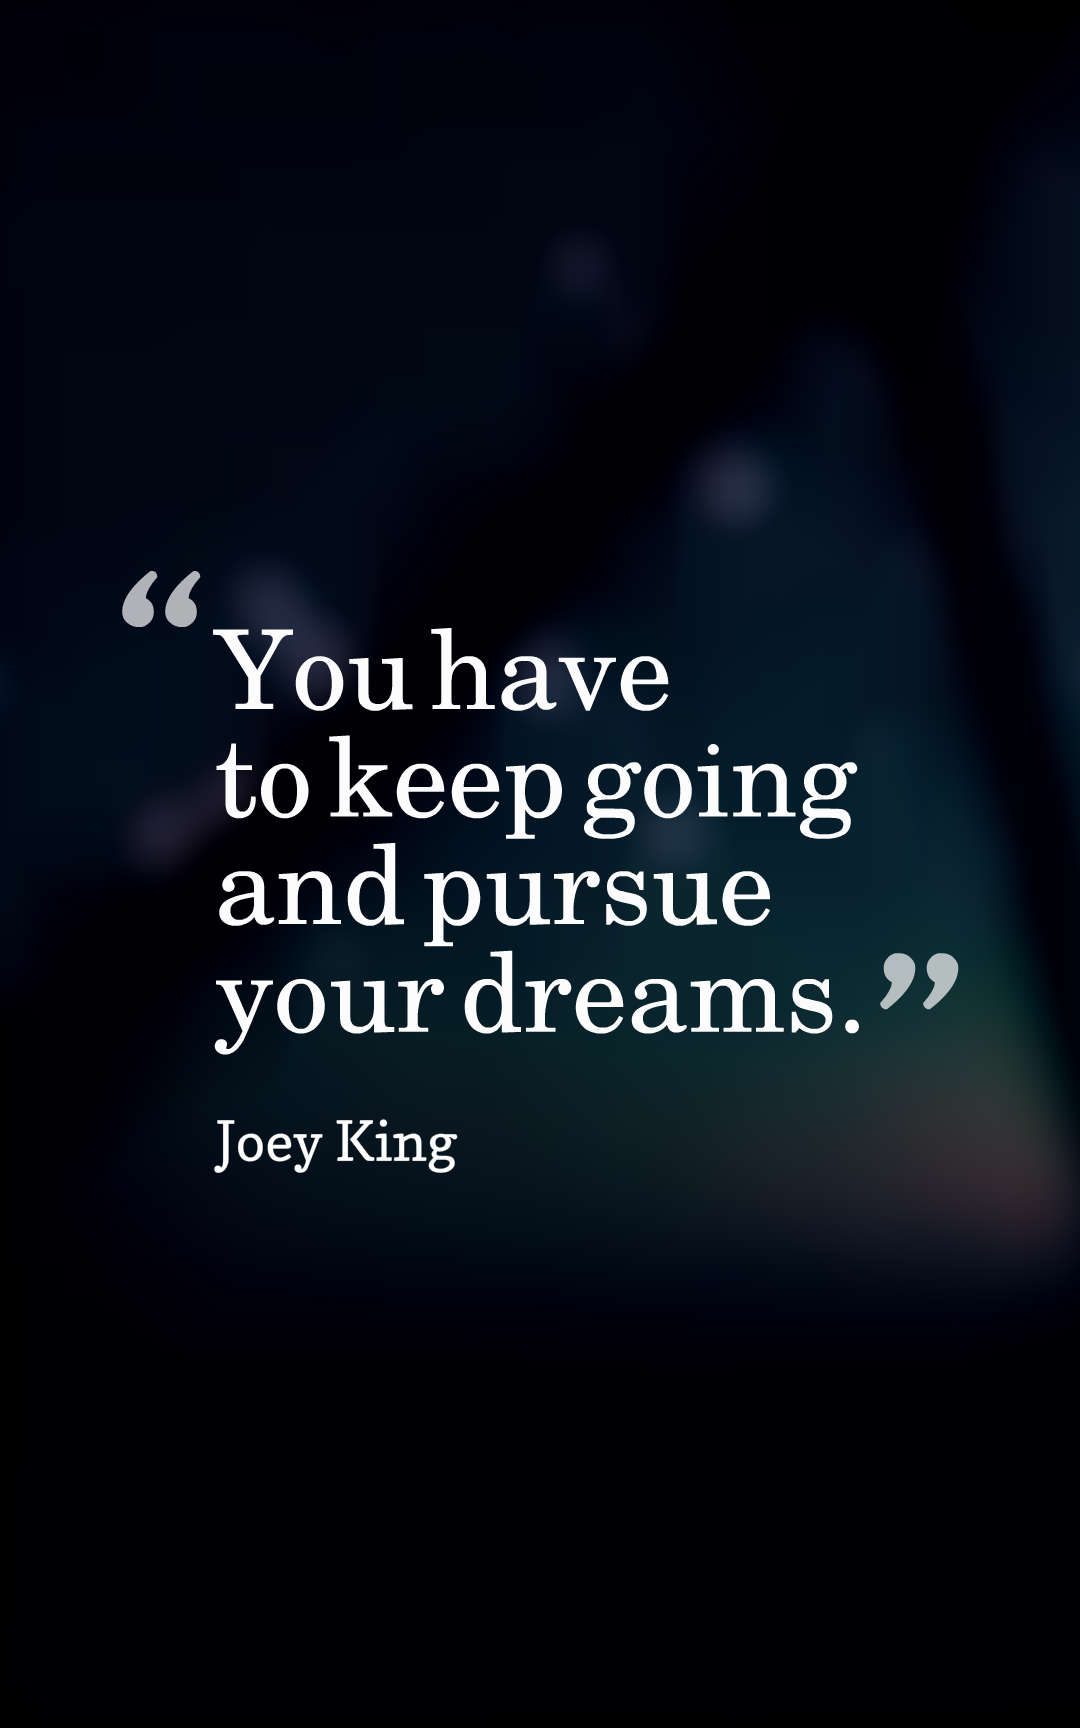 You have to keep going and pursue your dreams.